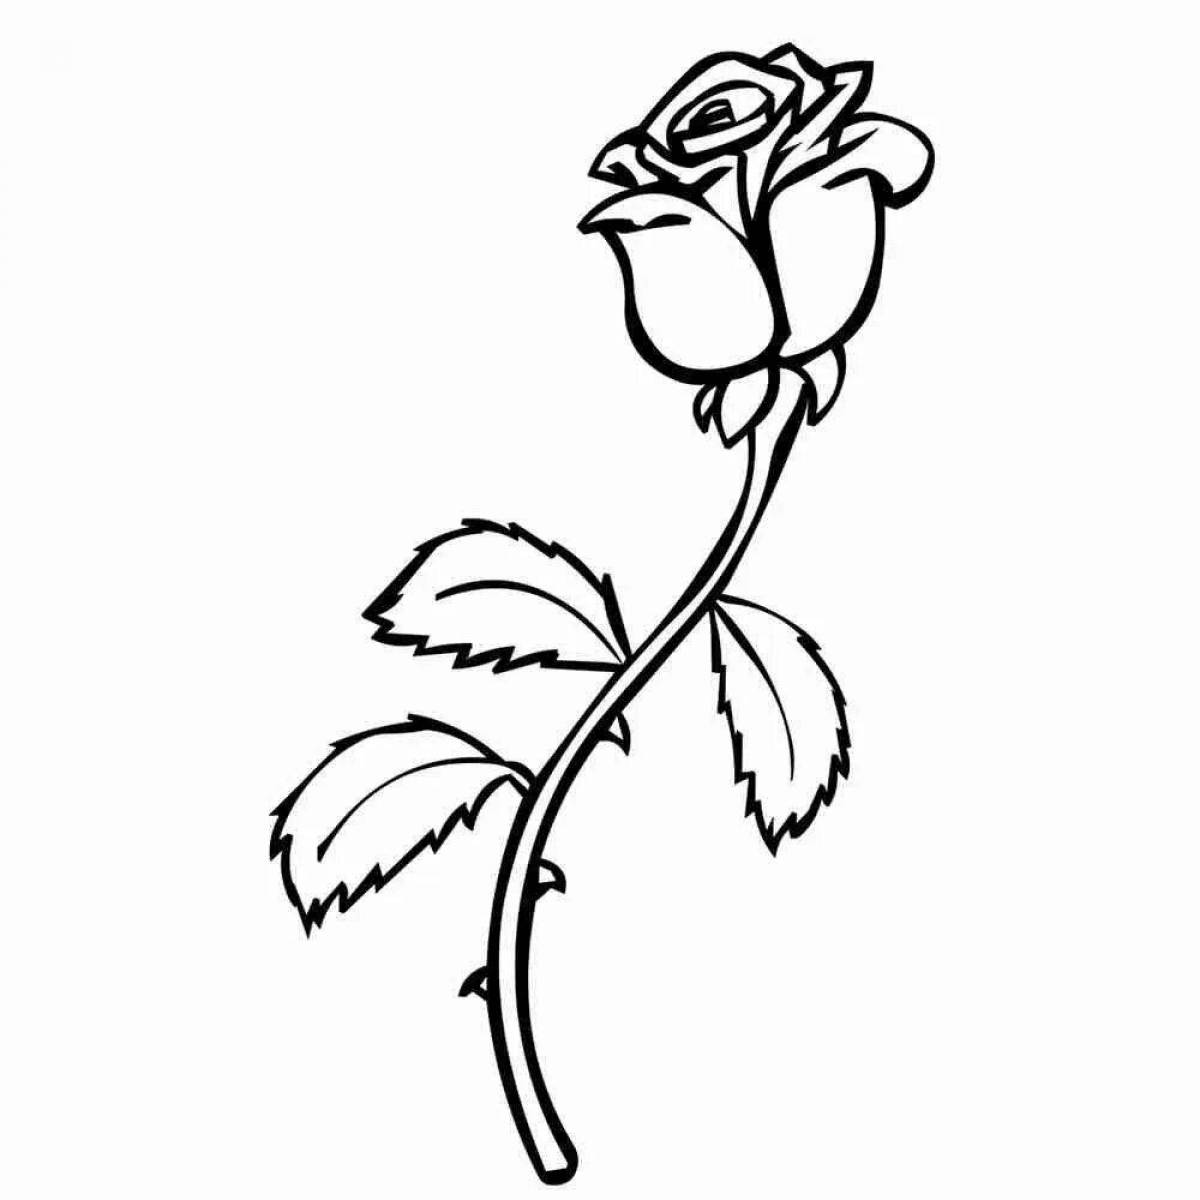 Coloring pages with roses